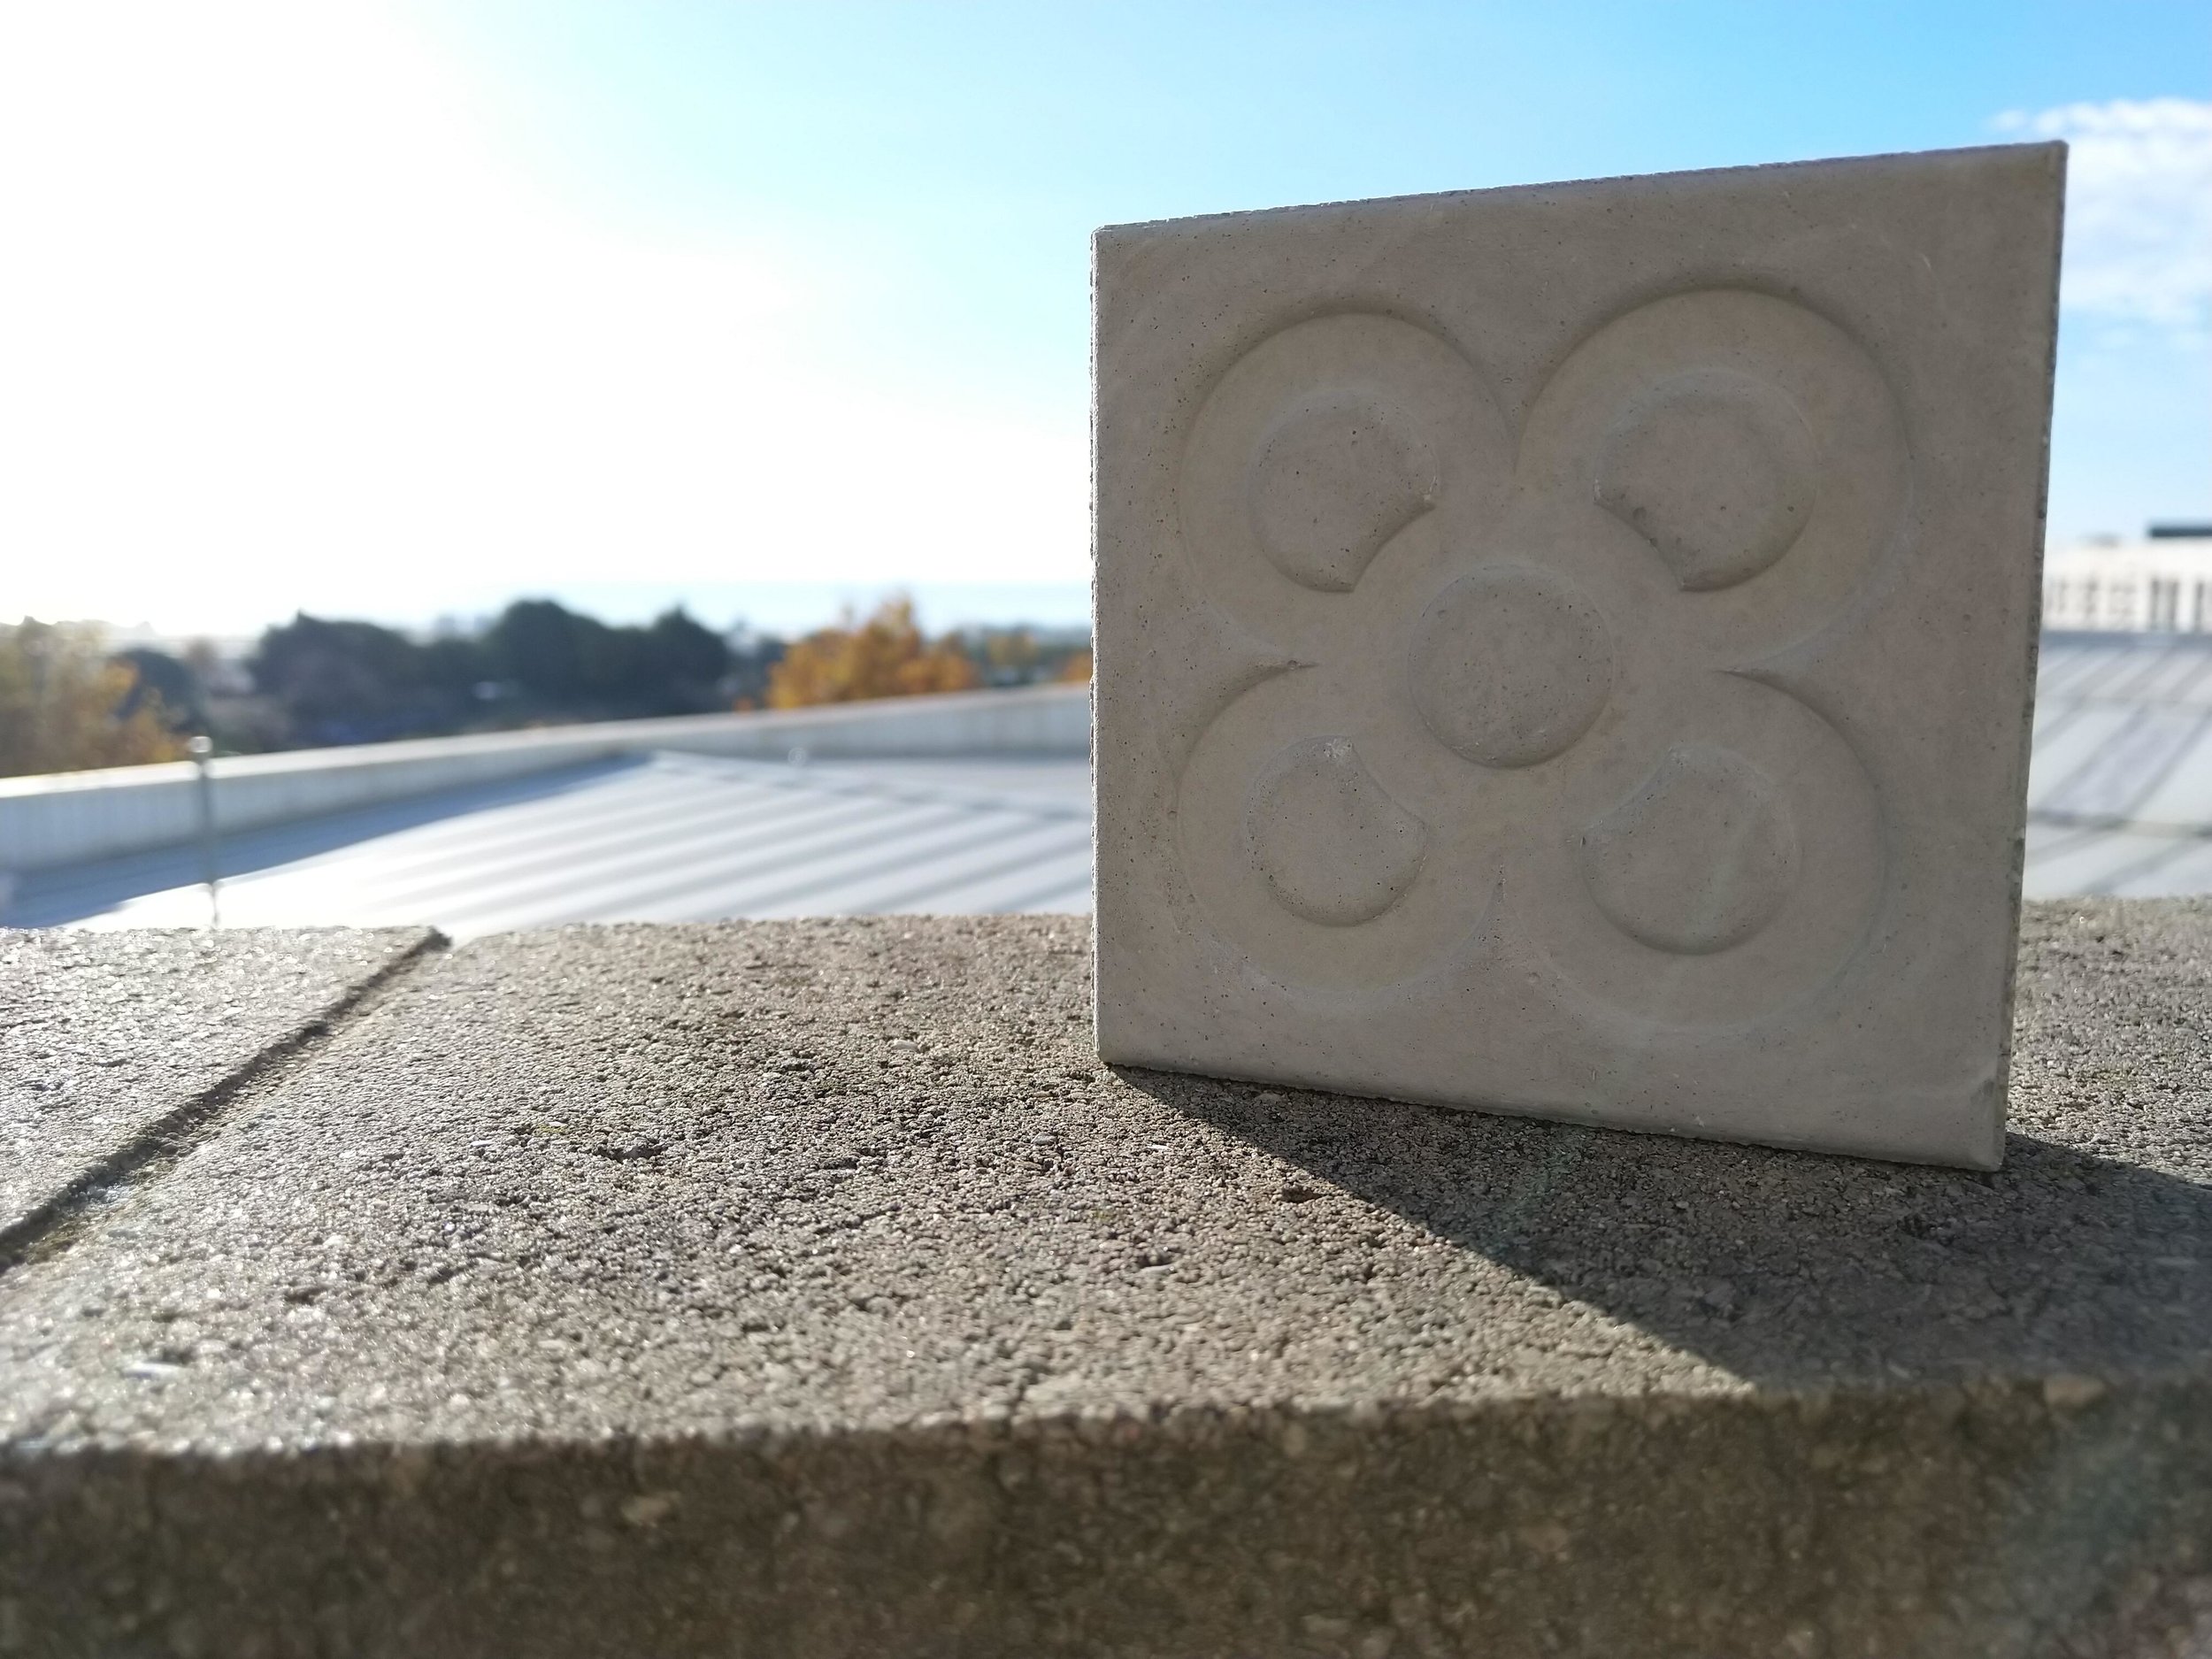 Sustainability is a major issue in today’s world, and additive manufacturing may be able to help the concrete industry lower CO2 emissions.